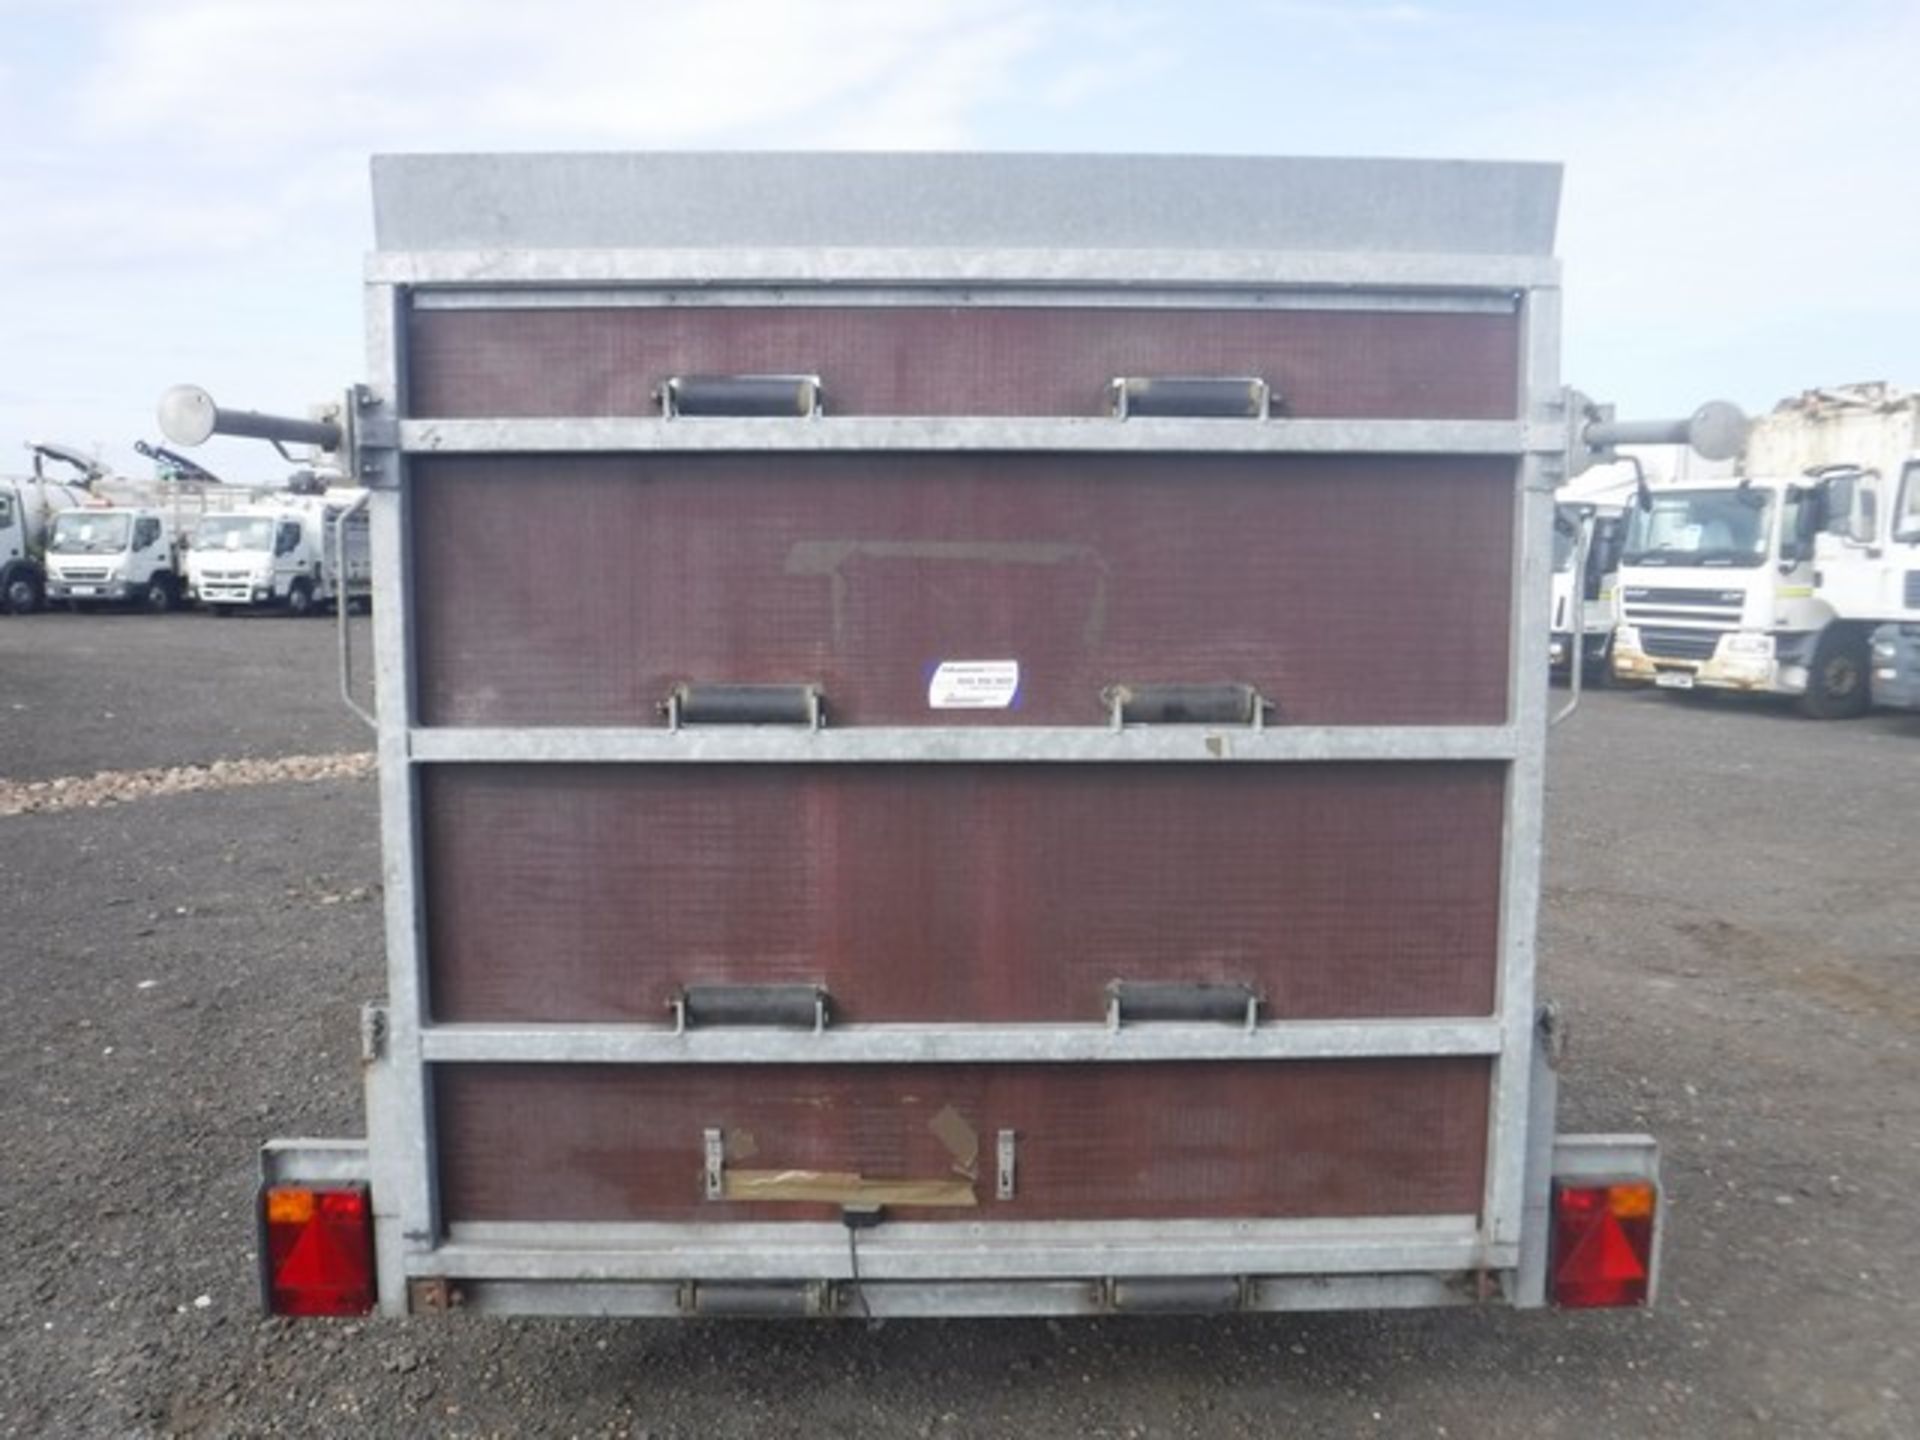 2003 INDESPENSION 18' X 6' twin axle trailer c/w 5' ramp. Max gross weight 2000kgs. VIN 076764. Asse - Image 7 of 10